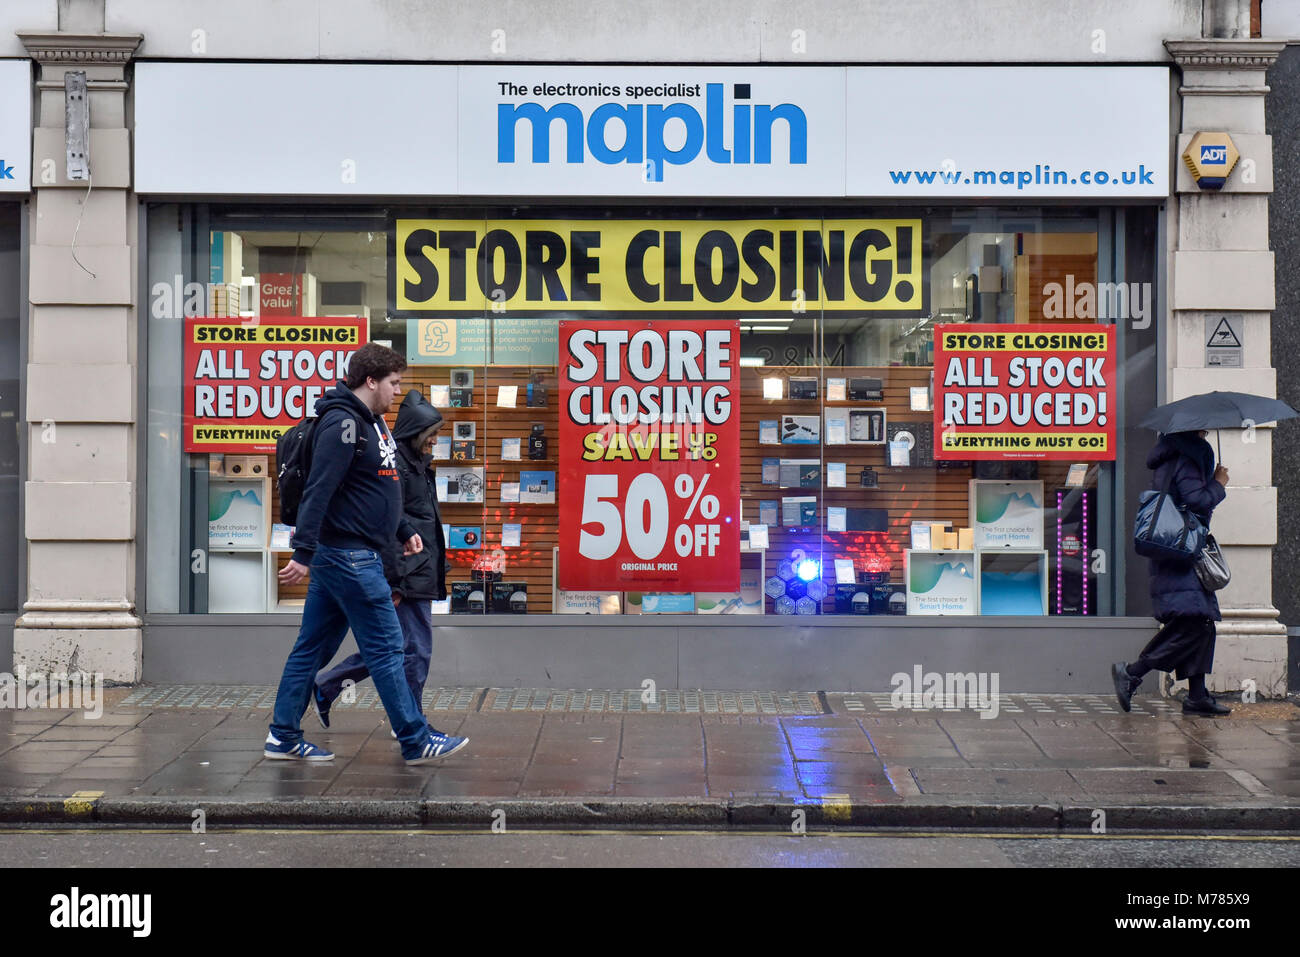 London, UK.  9 March 2018.  Discount signs have been hung on the windows of the Maplin electrical store on Tottenham Court Road, the once traditional home to many electronics stores.  Maplin entered administration on 28 February 2018 after suffering from the financial constraint of a lack of credit insurance.  Whilst Maplin's 200 stores continue to trade, the administrator, PricewaterhouseCoopers, has made 63 head office staff redundant warning that unless a buyer is found soon, it would begin to close stores down.  Credit: Stephen Chung / Alamy Live News Stock Photo